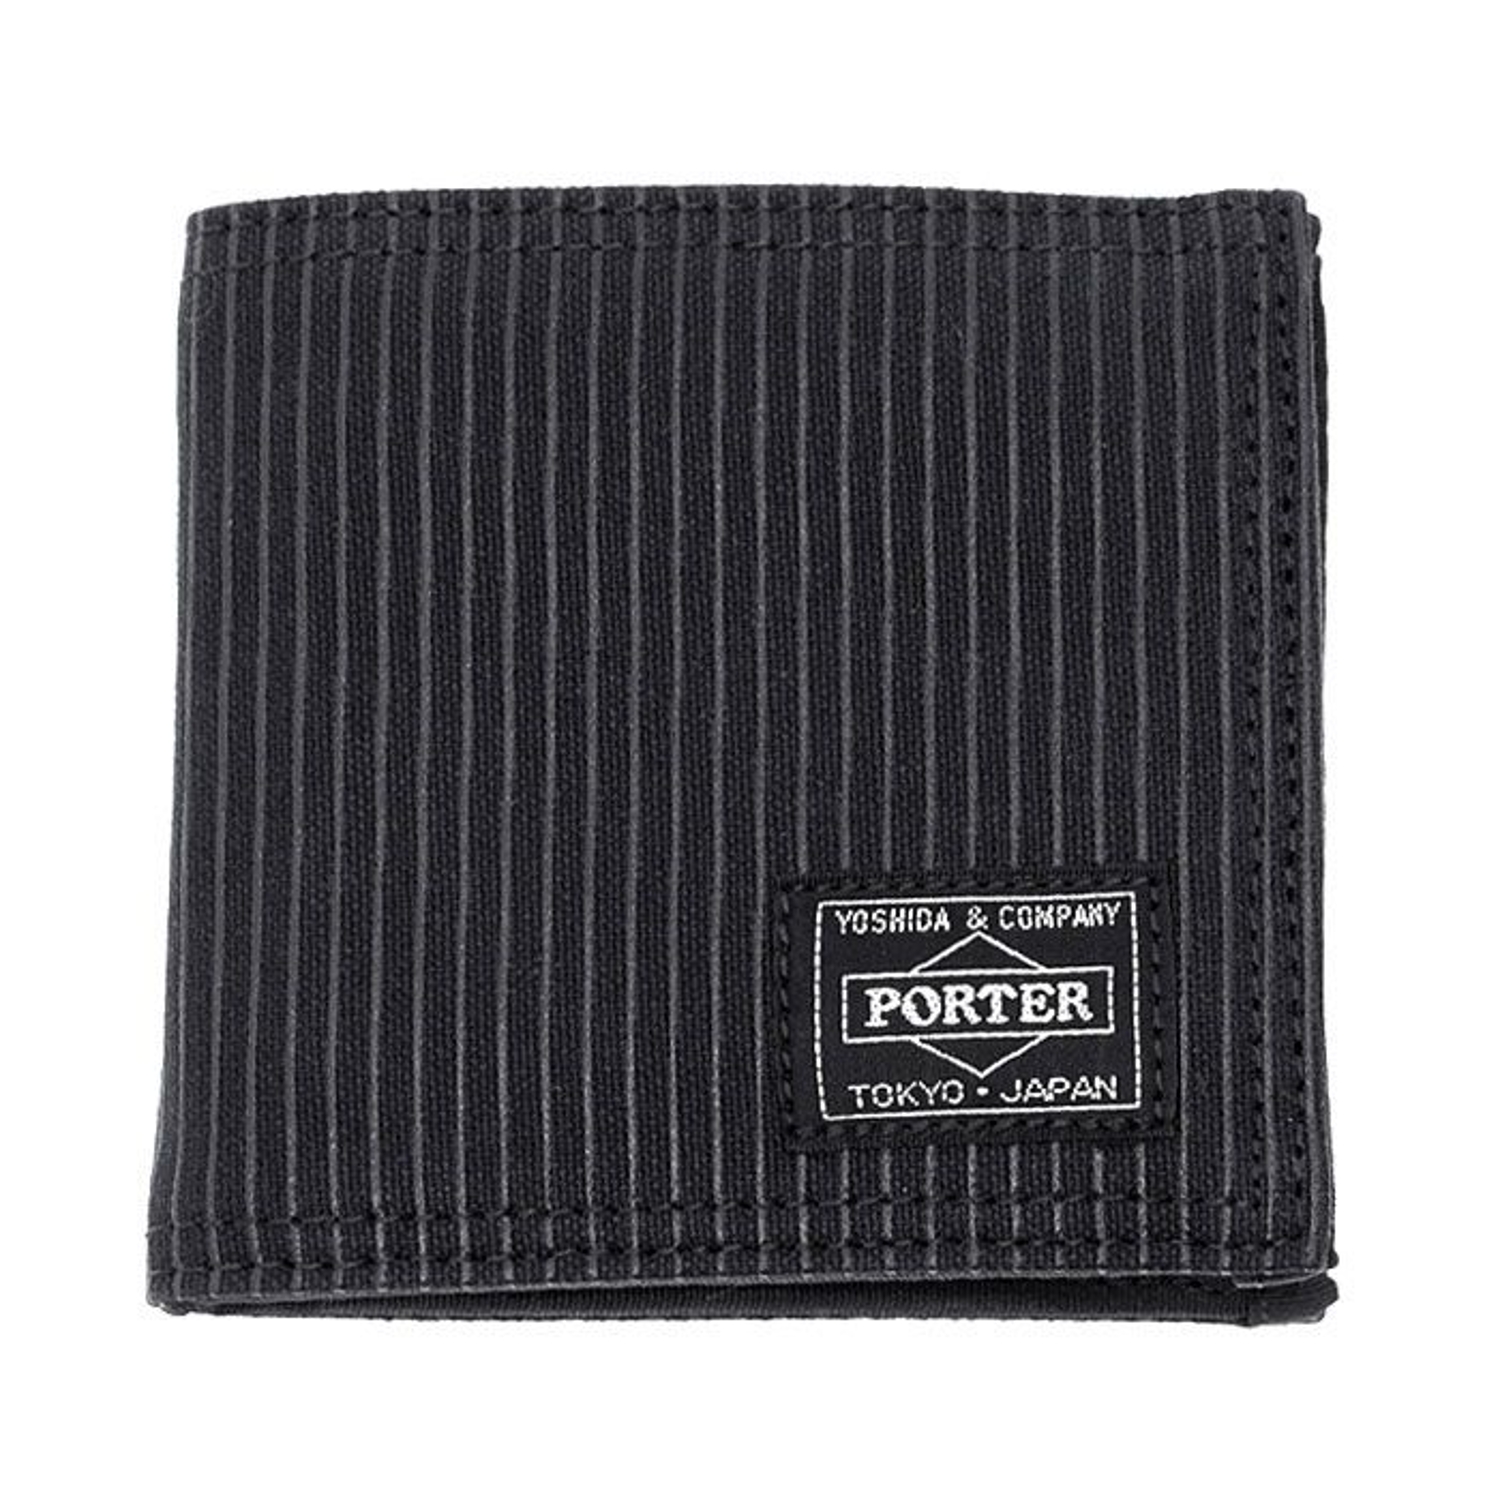 PORTER / DRAWING / WALLET (101274)